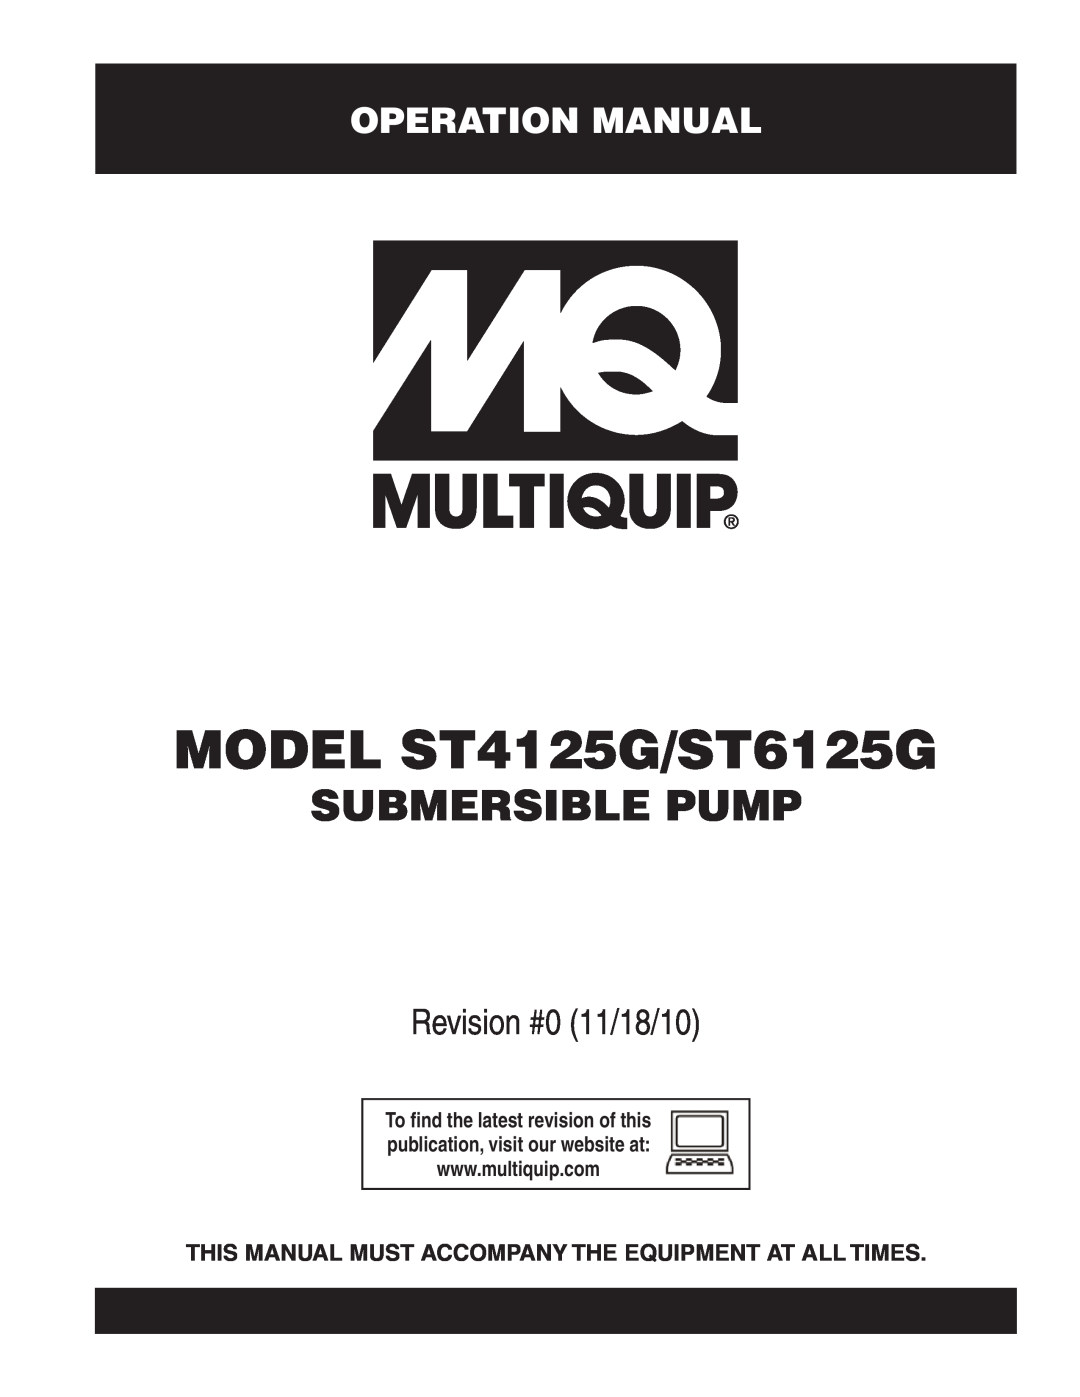 Multiquip ST4125G, ST6125G operation manual Operation Manual, This Manual Must Accompany The Equipment At All Times 